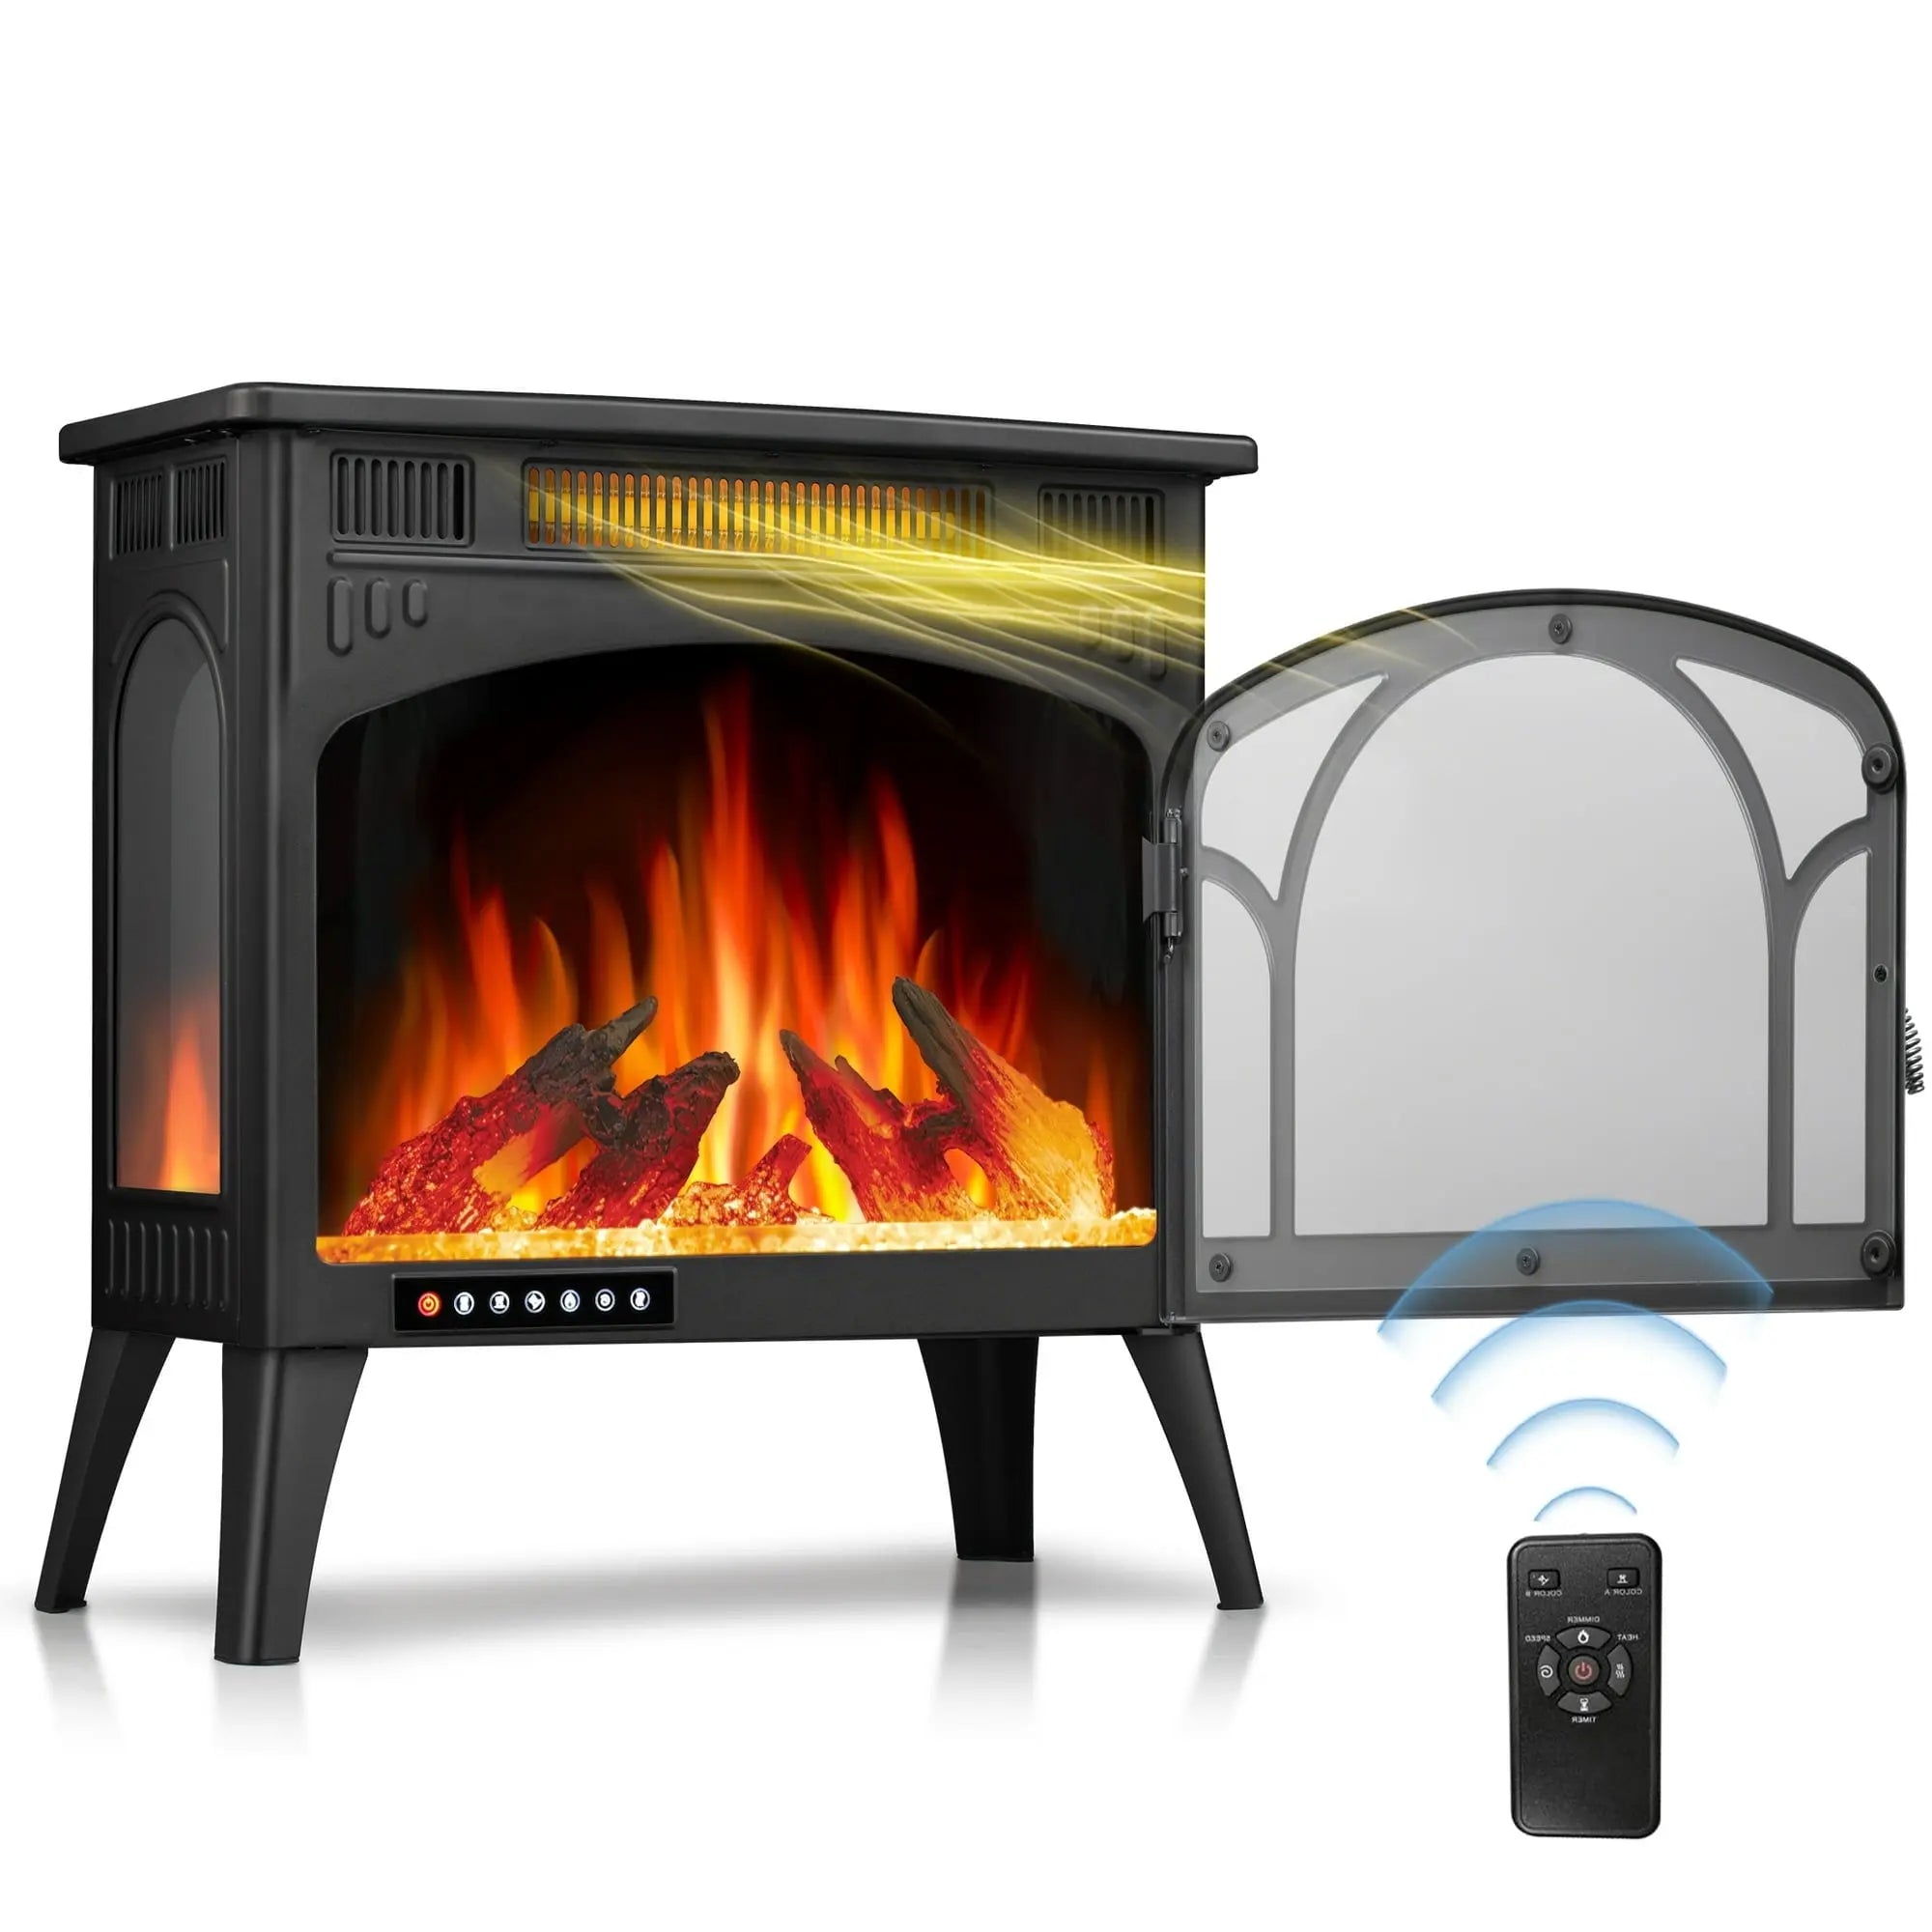 KISSAIR Electric Fireplace Heater 25’’ with 3D Realistic Flame Effect, Freestanding Fireplace, Different Flame Color, 500W/1500W,- Black